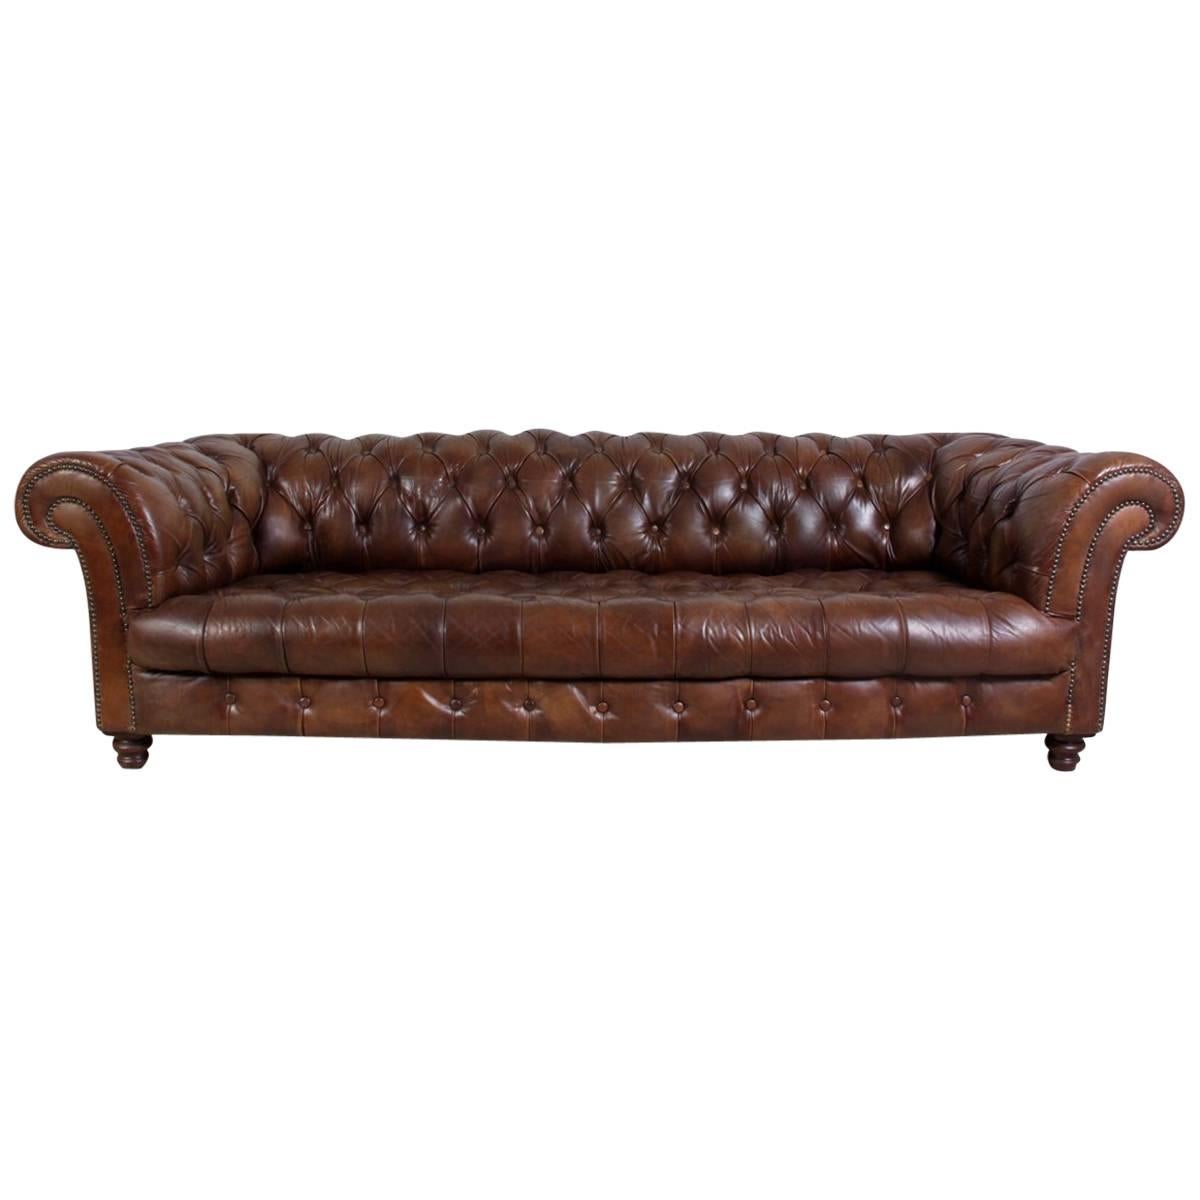 Vintage Leather Chesterfield with Buttoned Seat